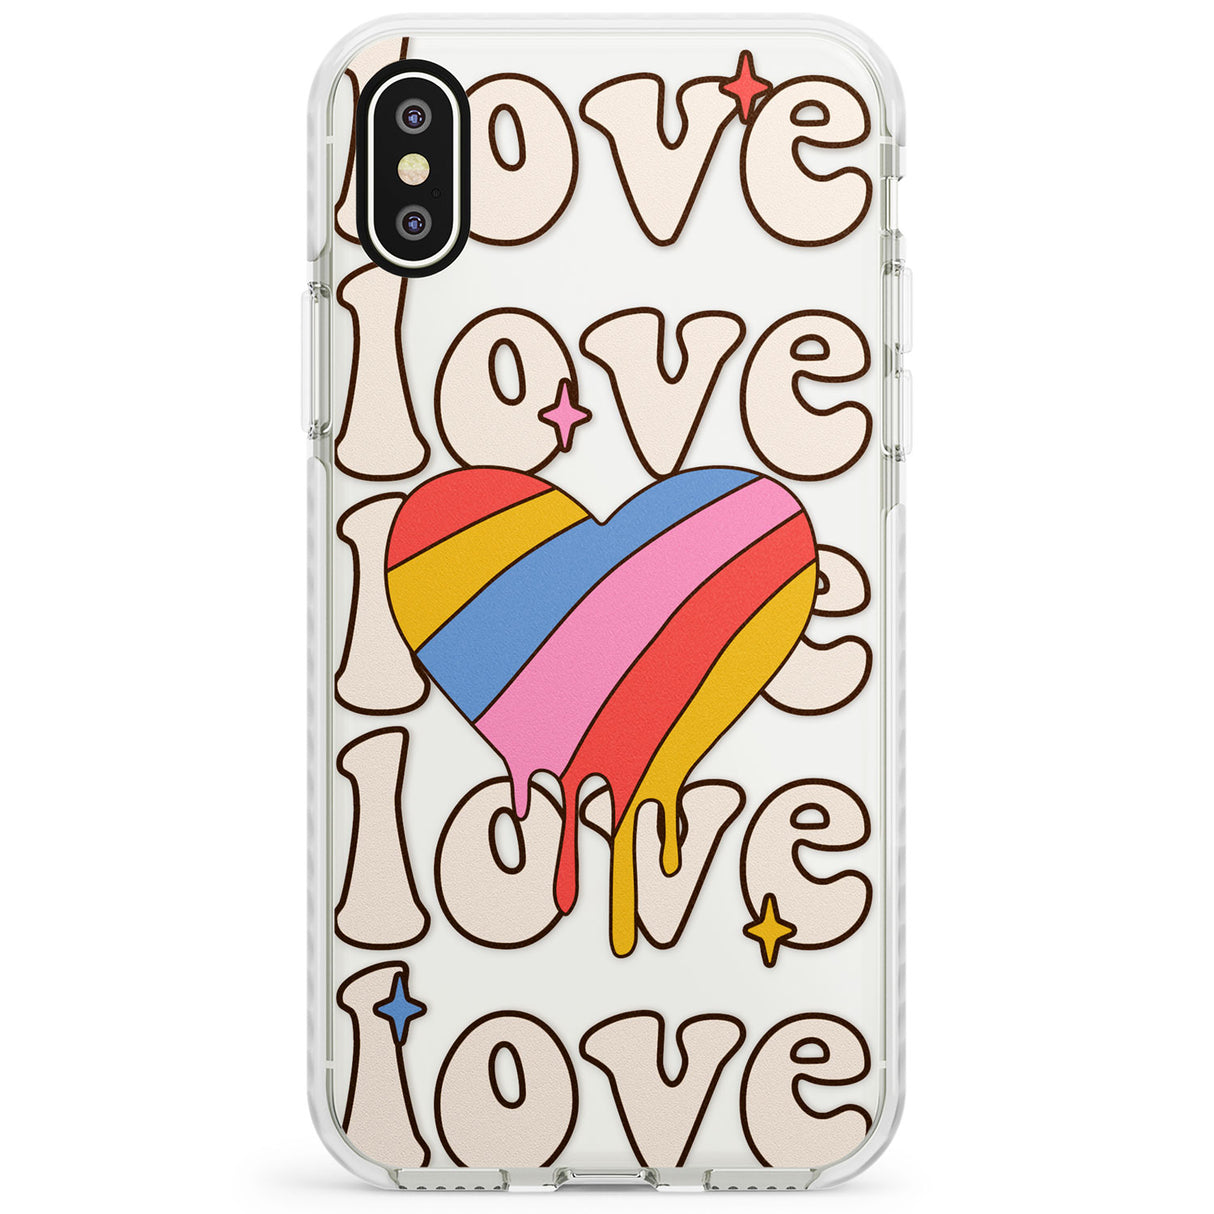 Groovy Love Impact Phone Case for iPhone X XS Max XR